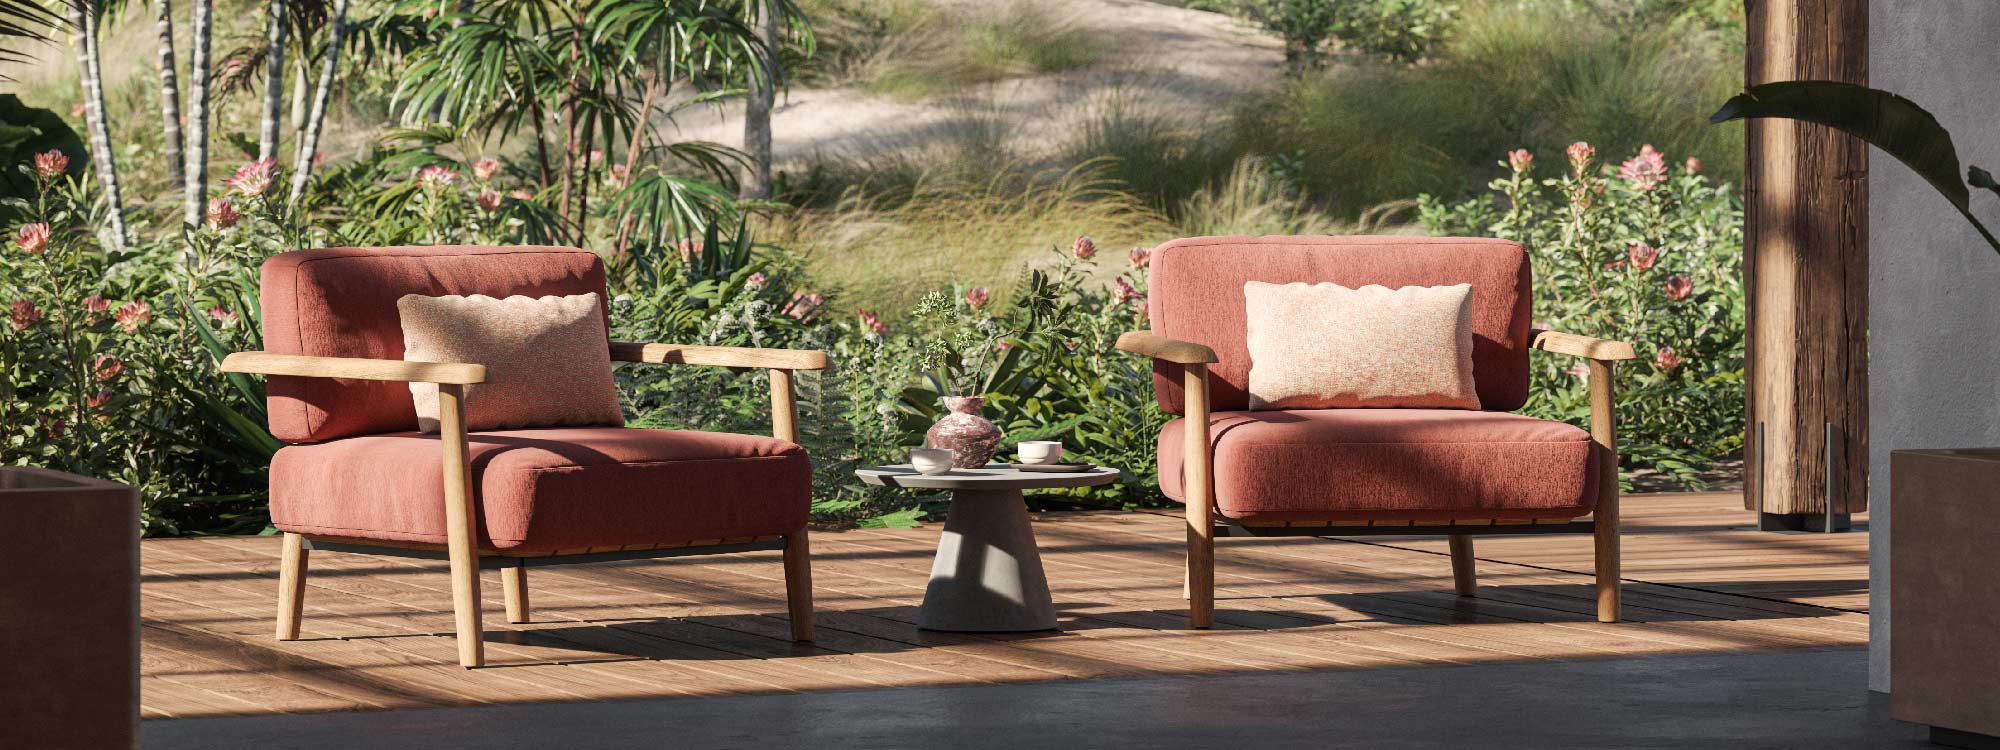 Image of pair of Royal Botania Mambo Lounge teak relax chairs with plump red cushions, next to Conix concrete side table